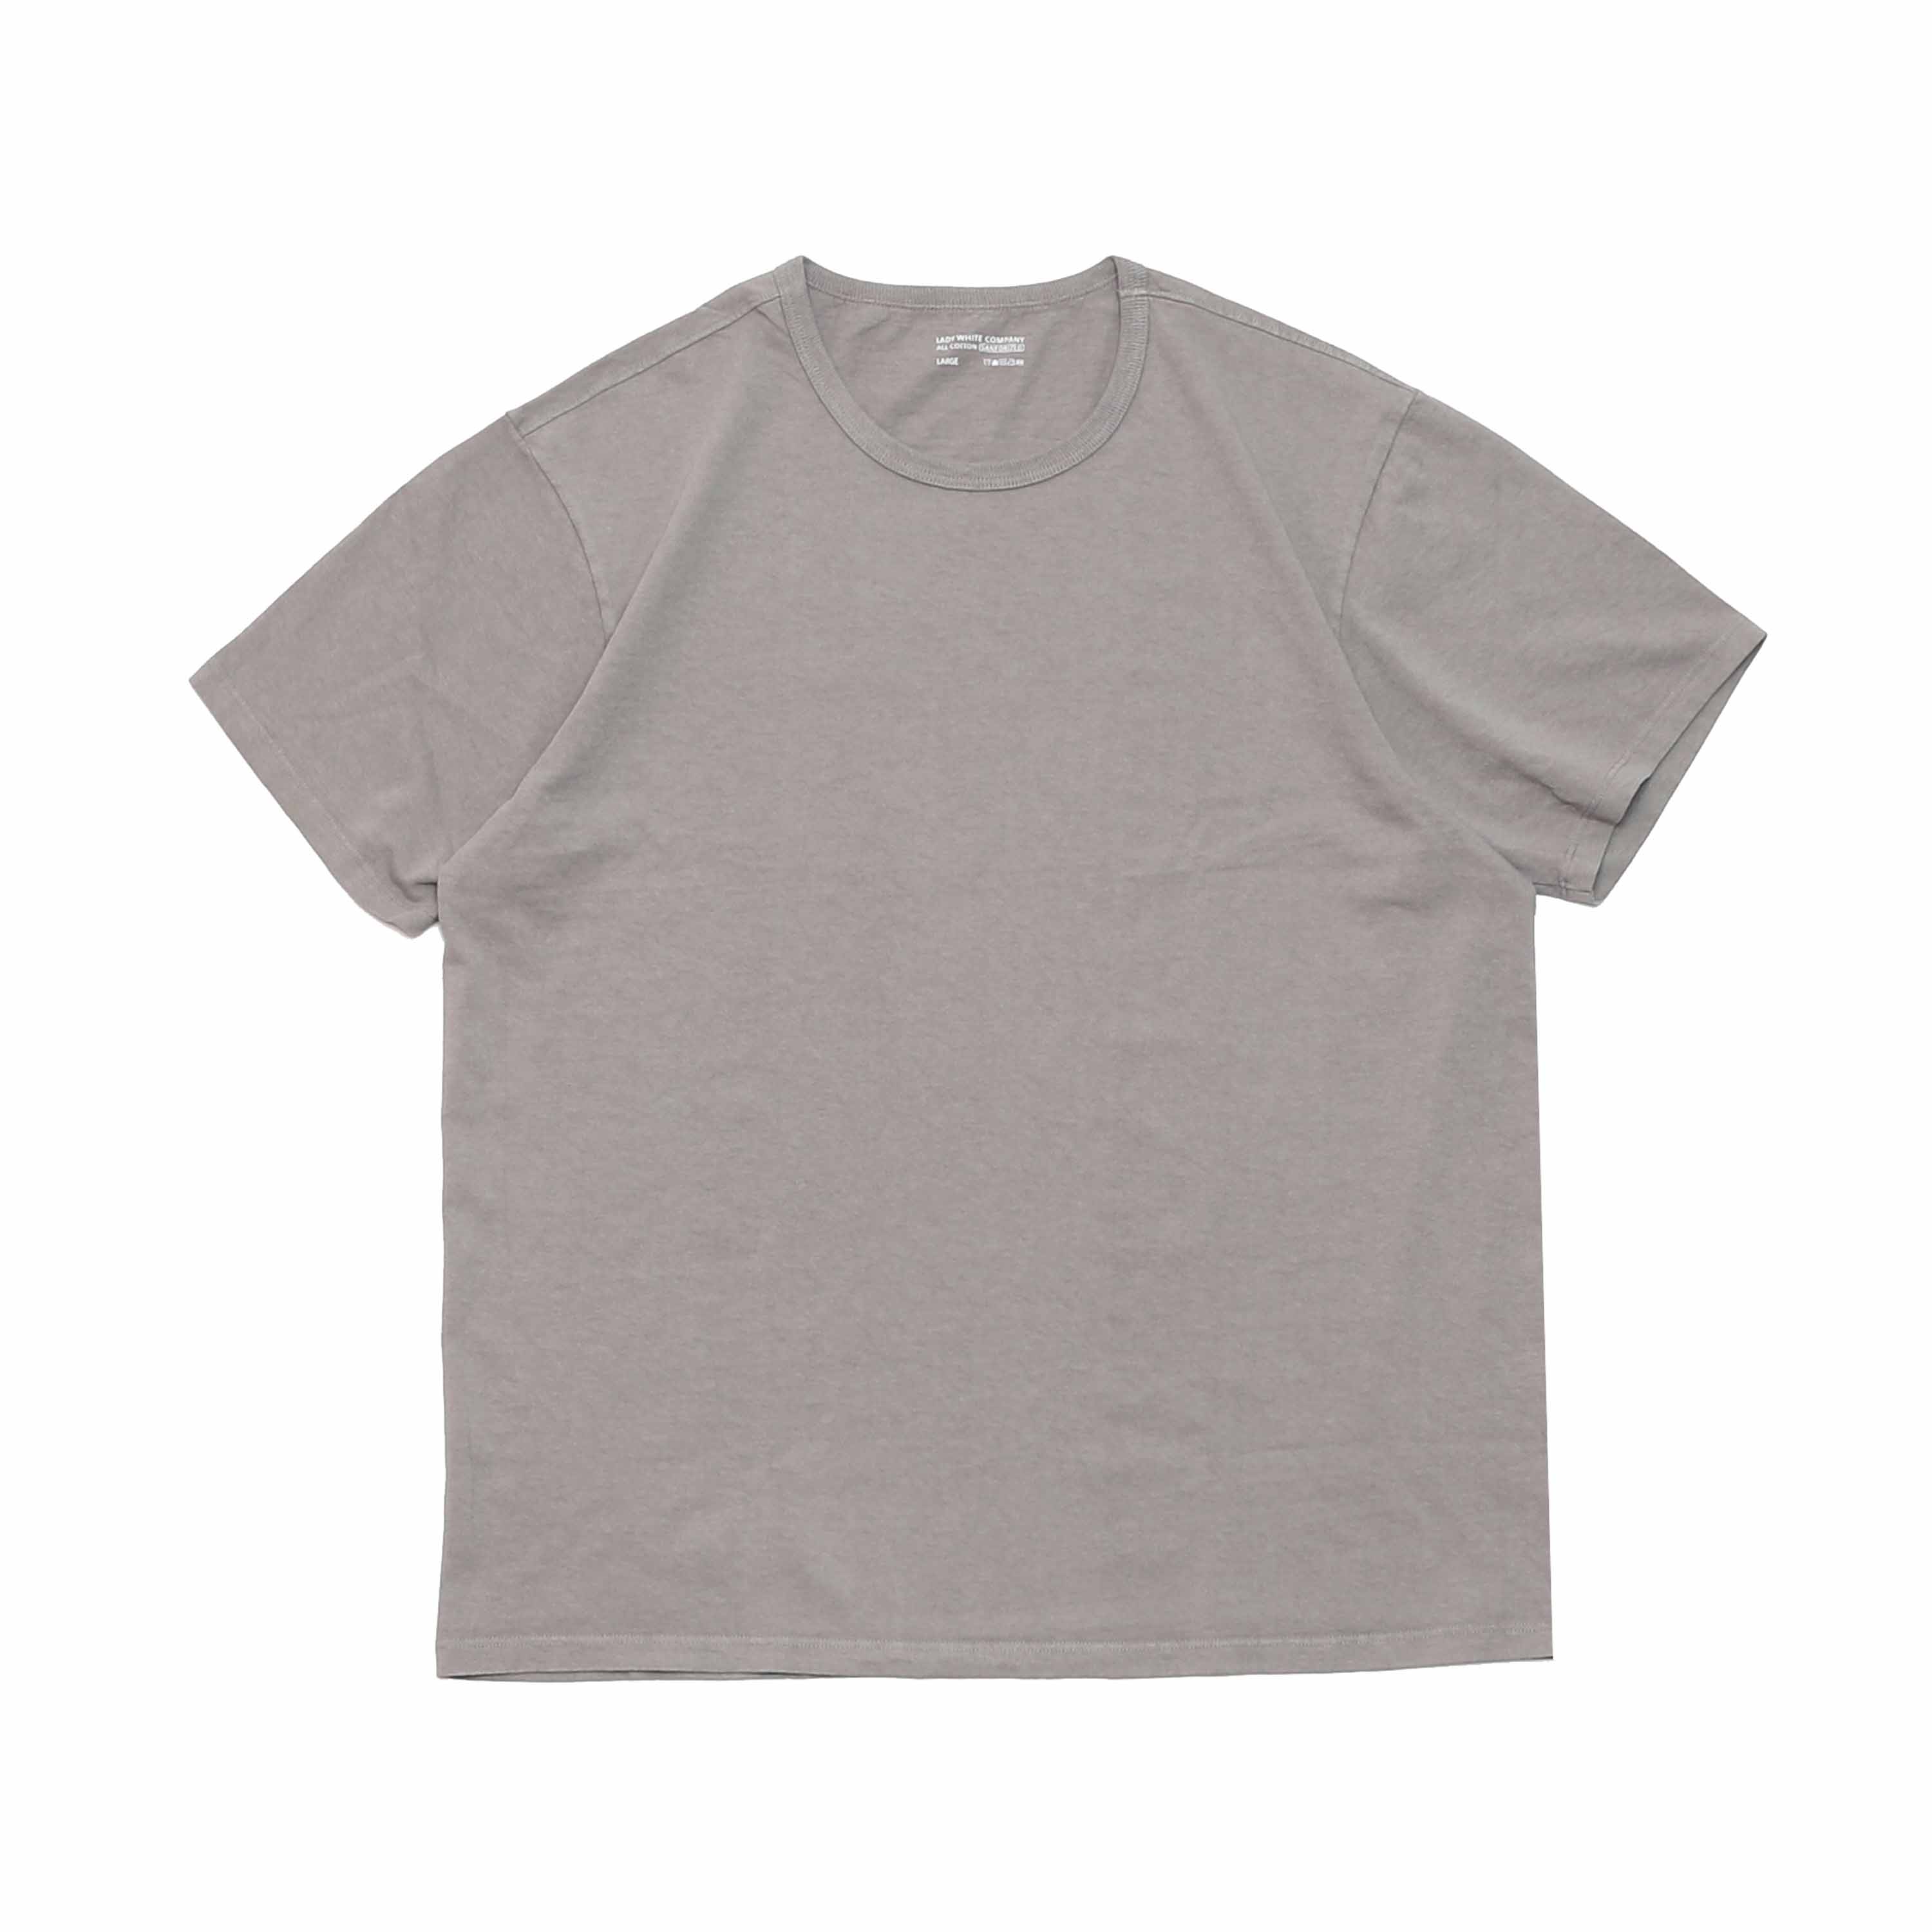 OUR T-SHIRTS - TRUE GREY